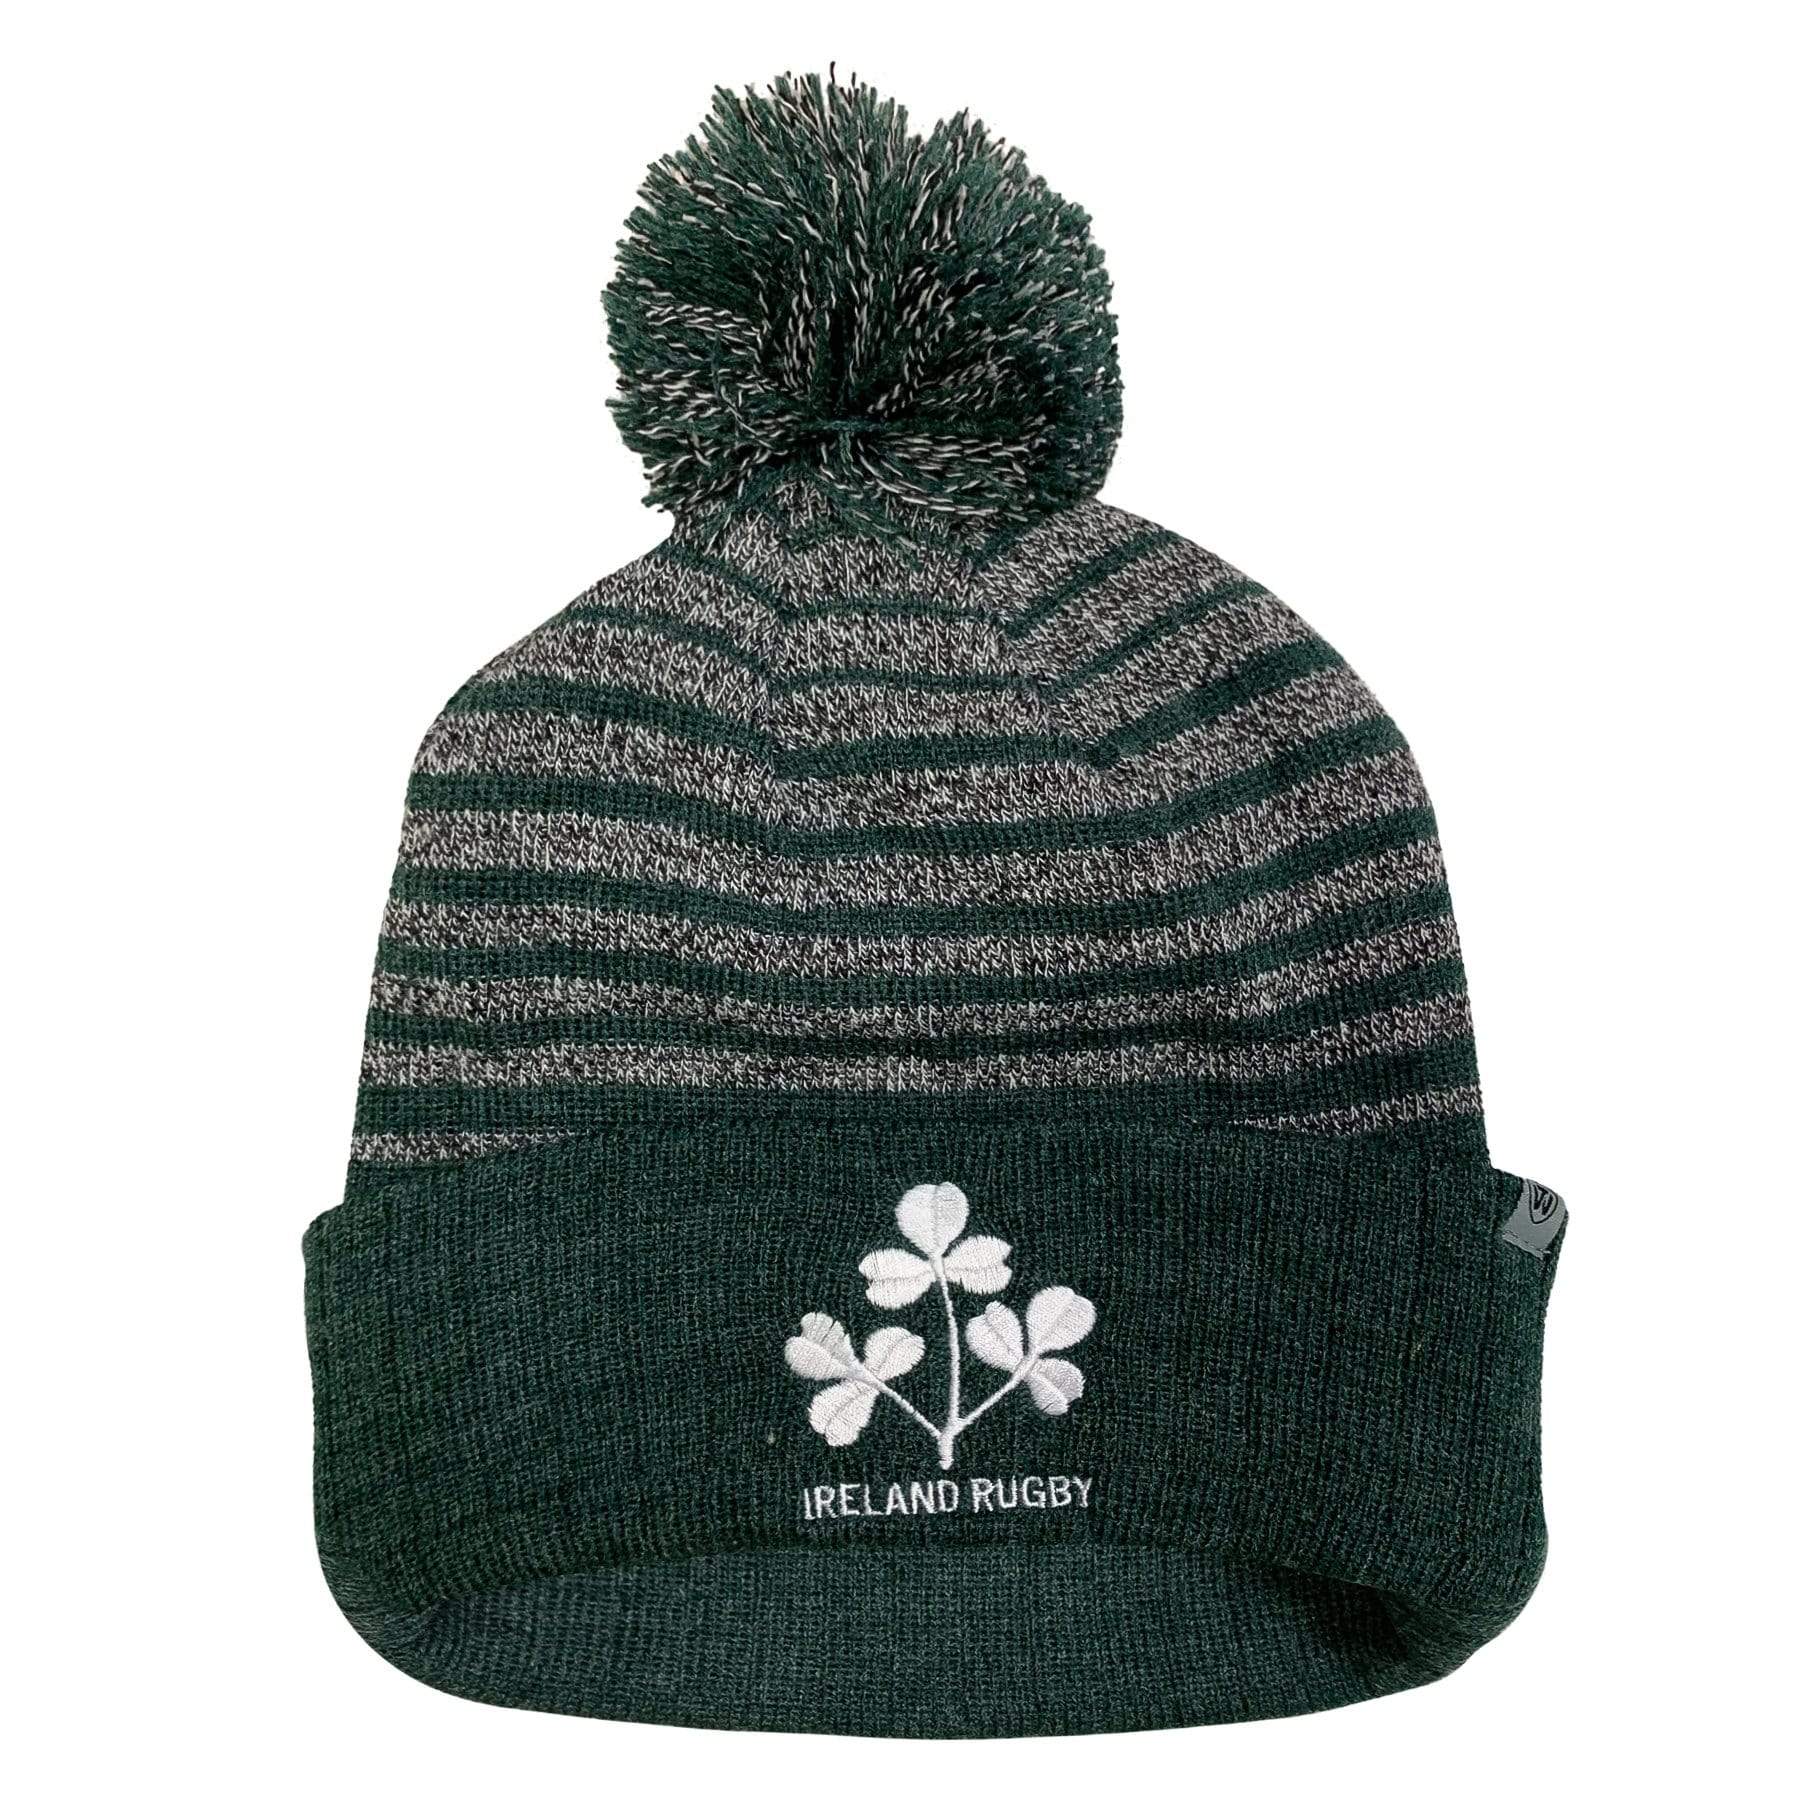 Rugby Imports Ireland Rugby Striped Knit Hat